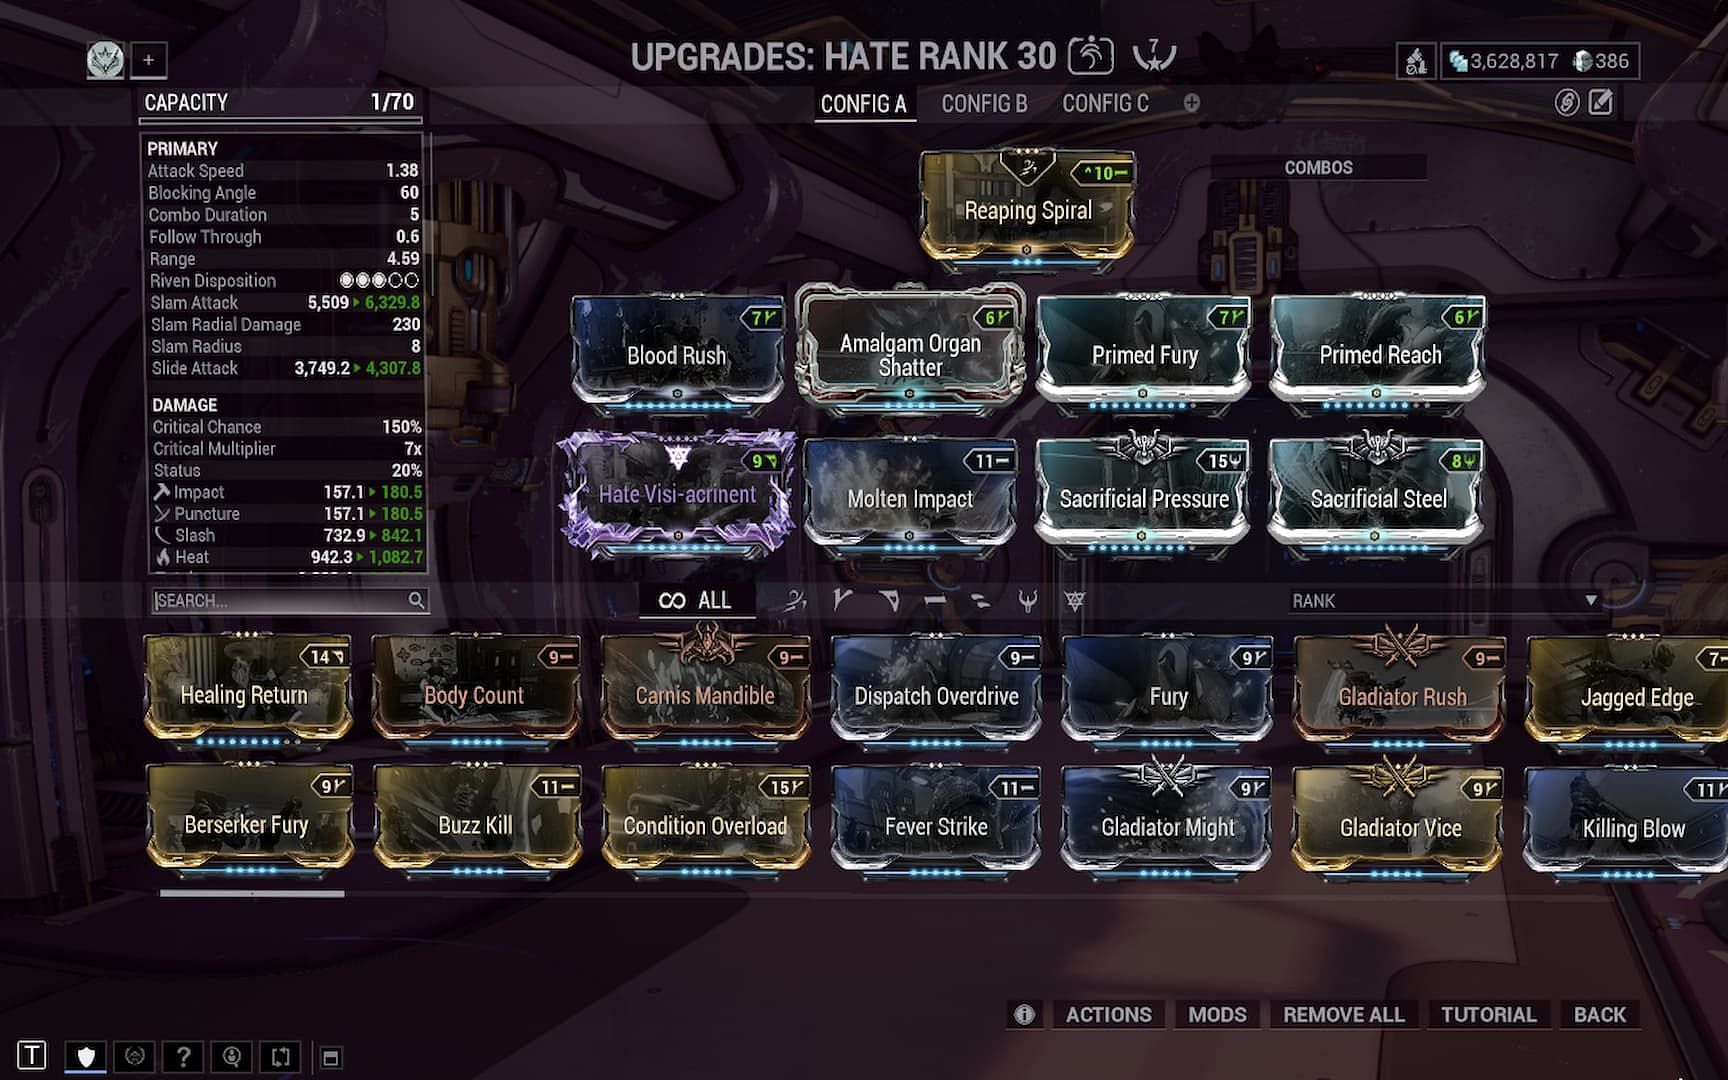 Incarnon Hate can be built for heavy attacks thanks to the high critical chance (Image via Digital Extremes)